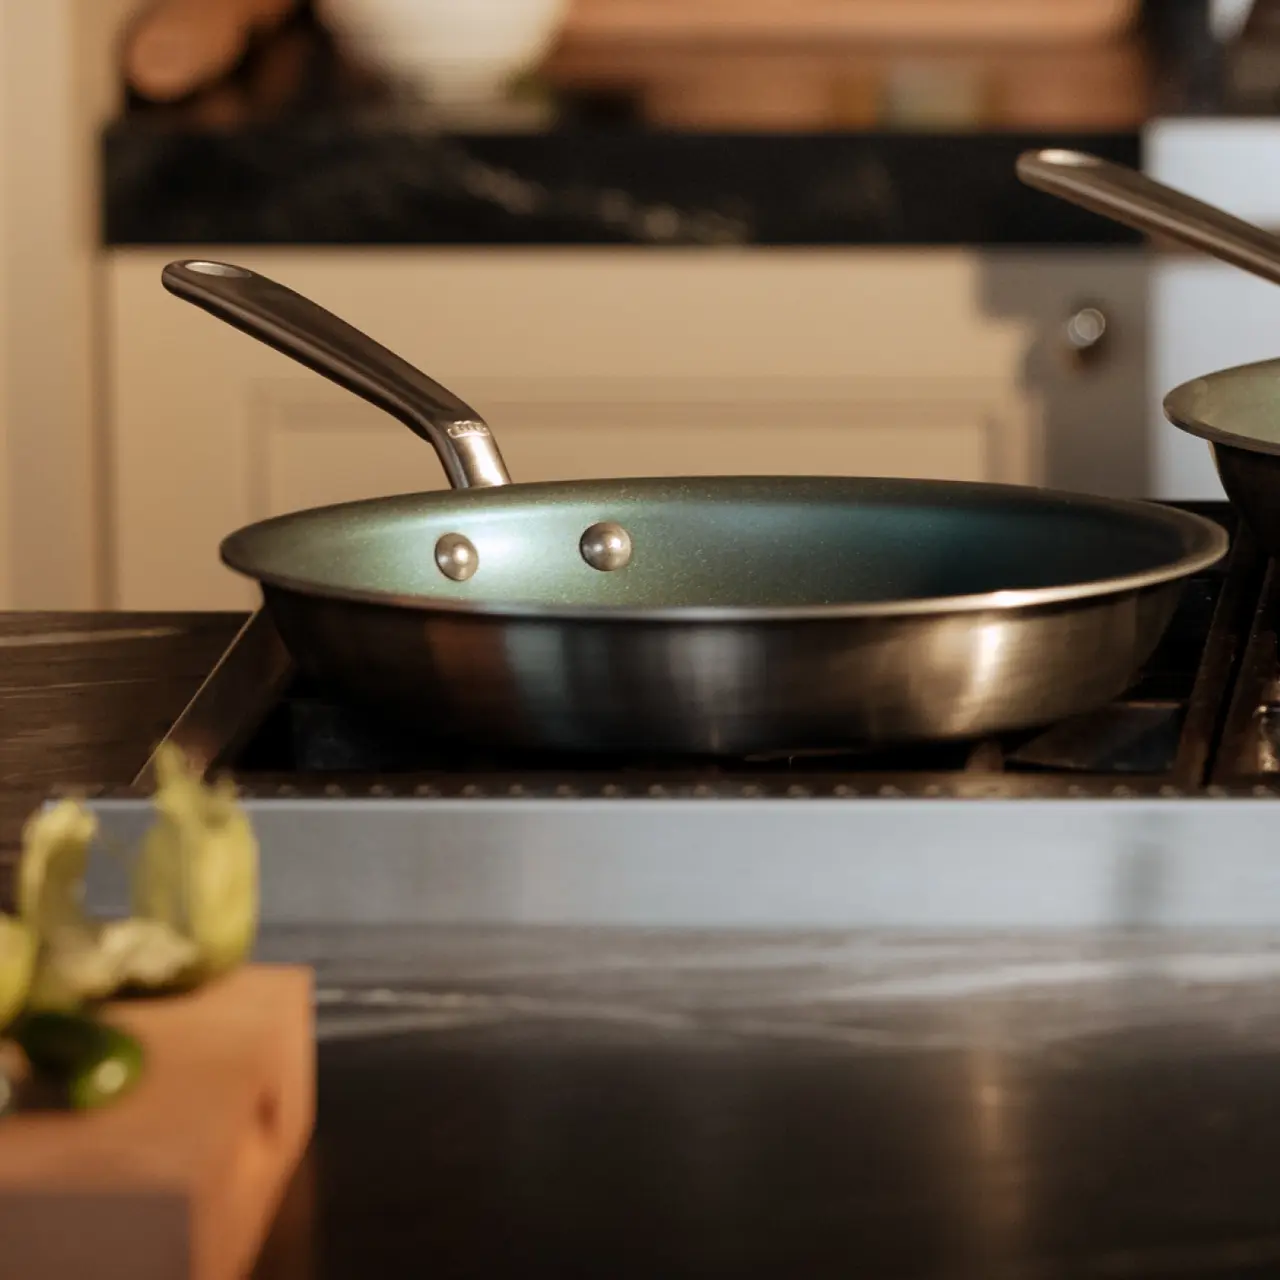 A frying pan with two rivets forming "eyes" on its inner surface, resembling a face, is placed on a stove in a home kitchen.